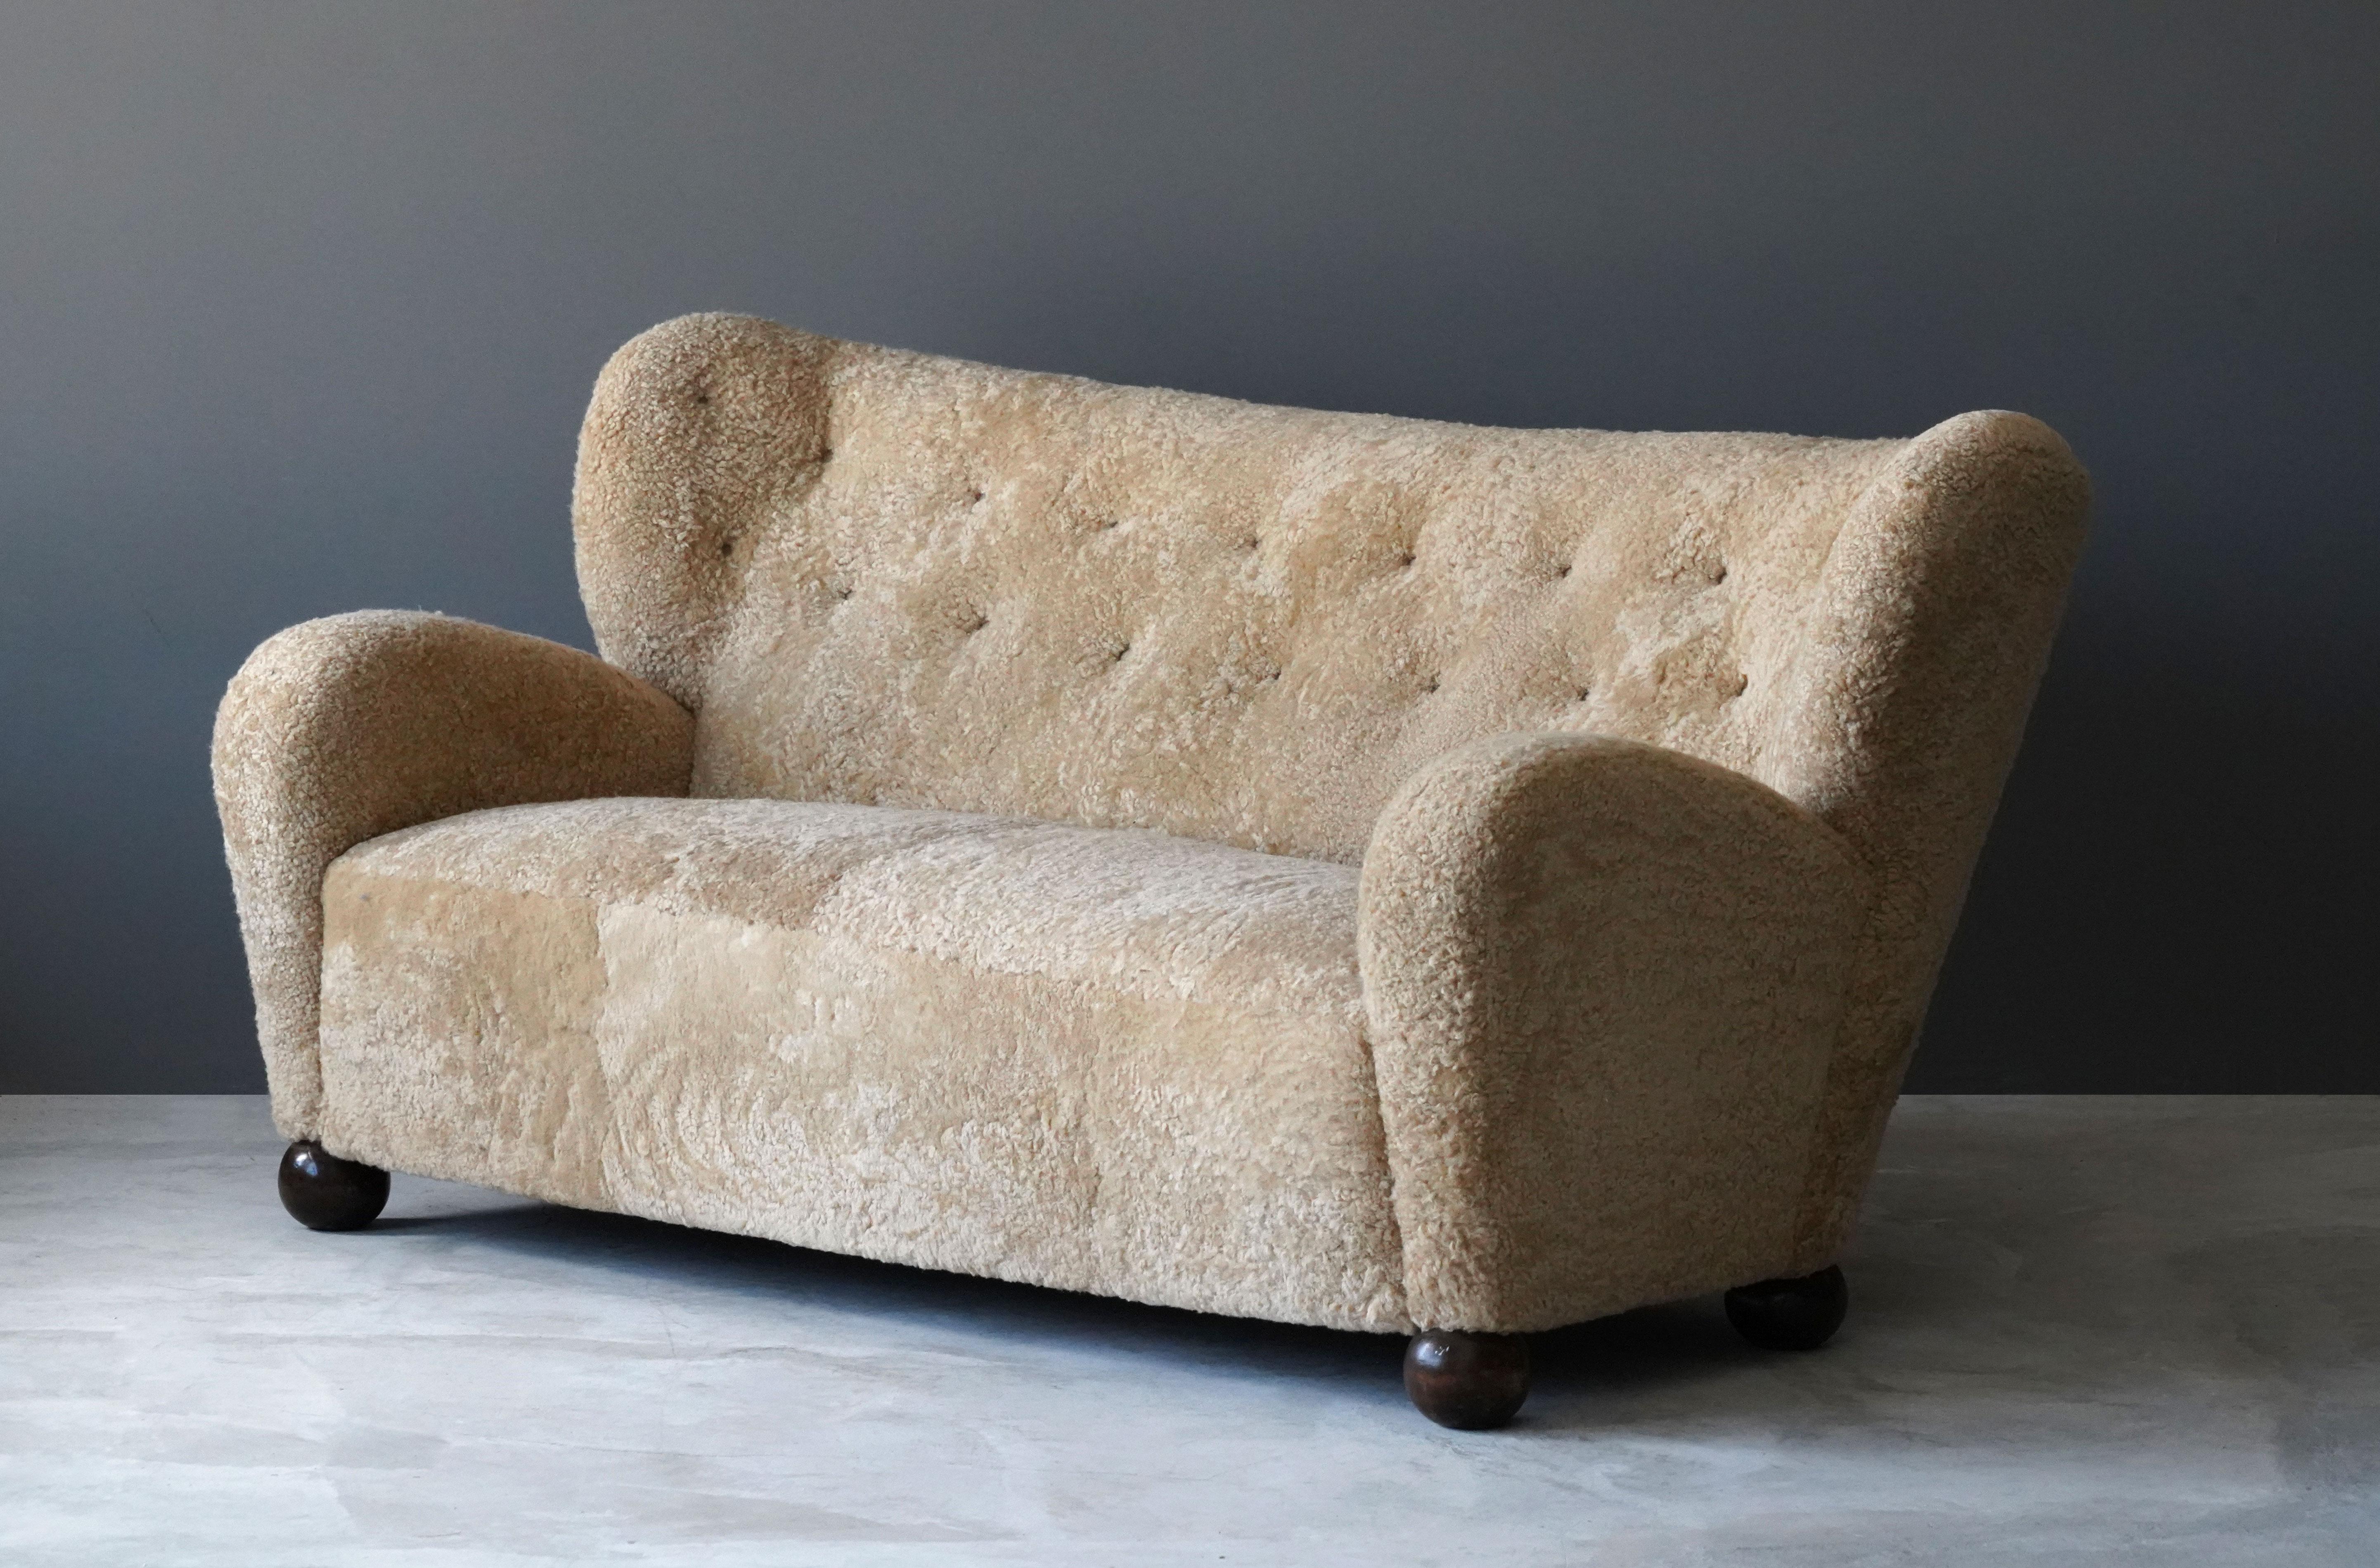 A large, organic sofa designed by Märta Blomstedt in 1939 for the lobby of Hotel Aulanko, Hämeenlinna, Finland. Overstuffed and upholstered in authentic natural beige sheepskin. Legs are stained birch.


Keywords: lambskin, lamb sheep hide,